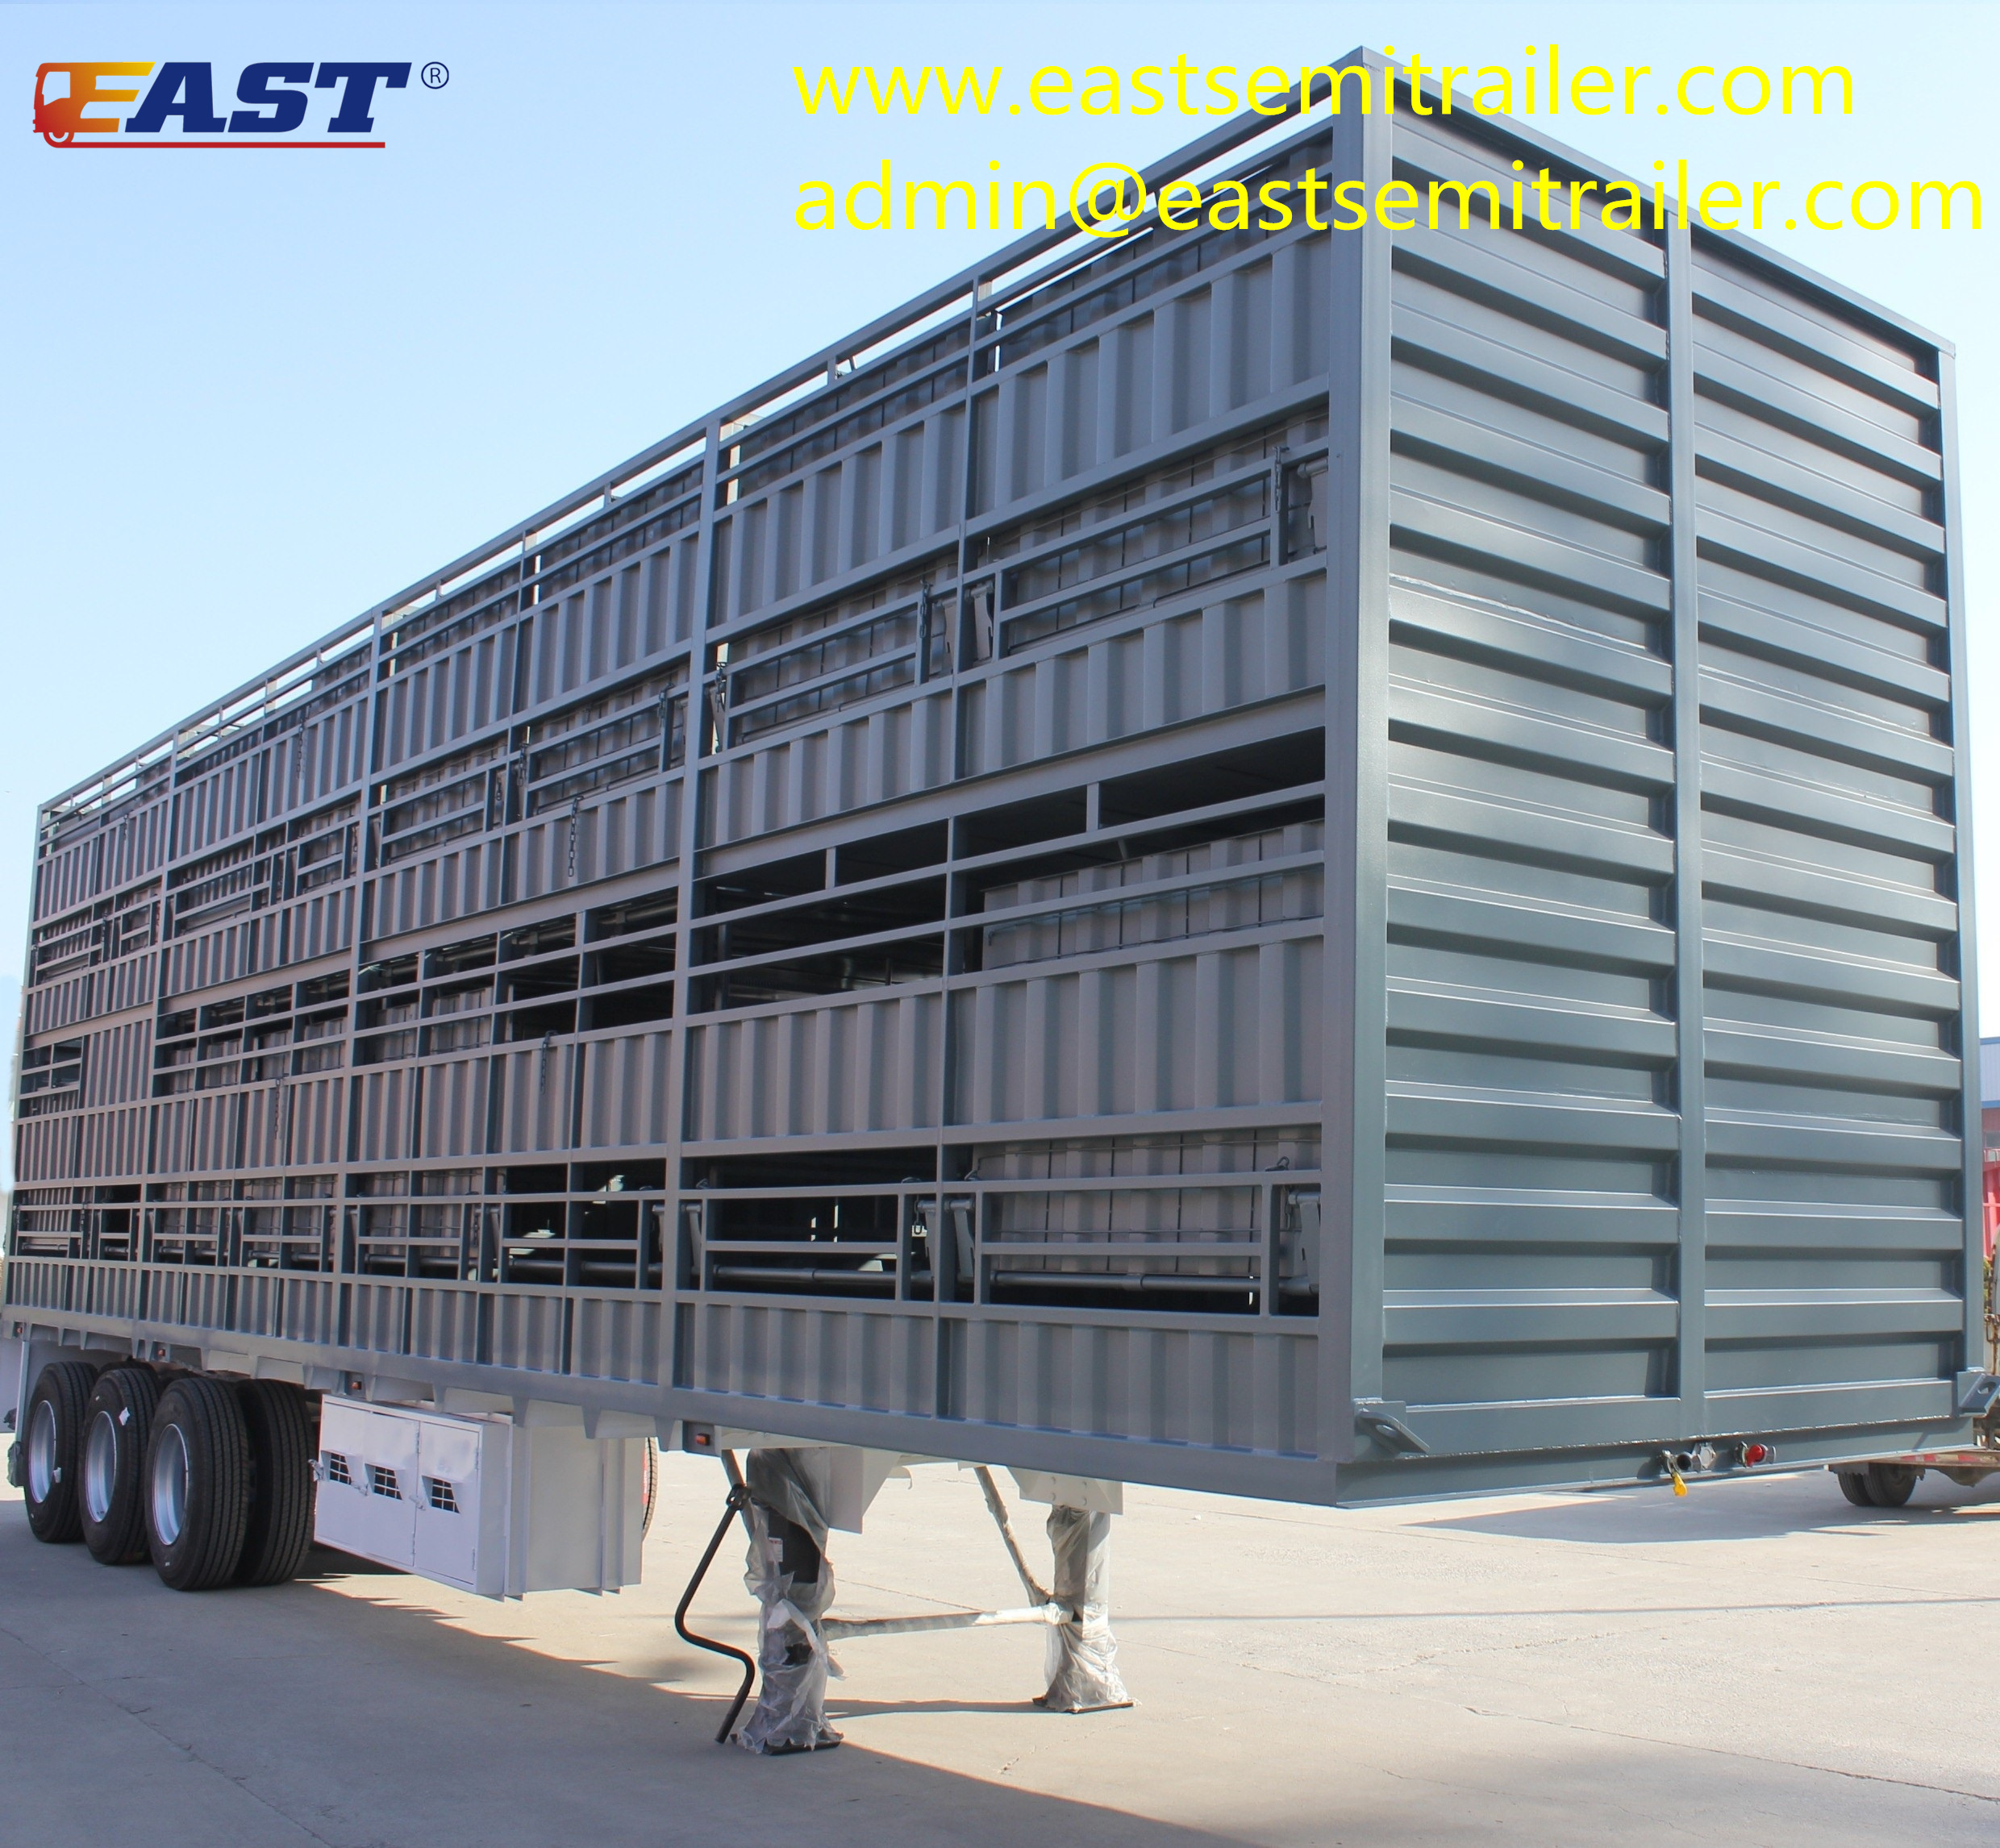 Livestock semi-trailer for transporting cattle and sheep